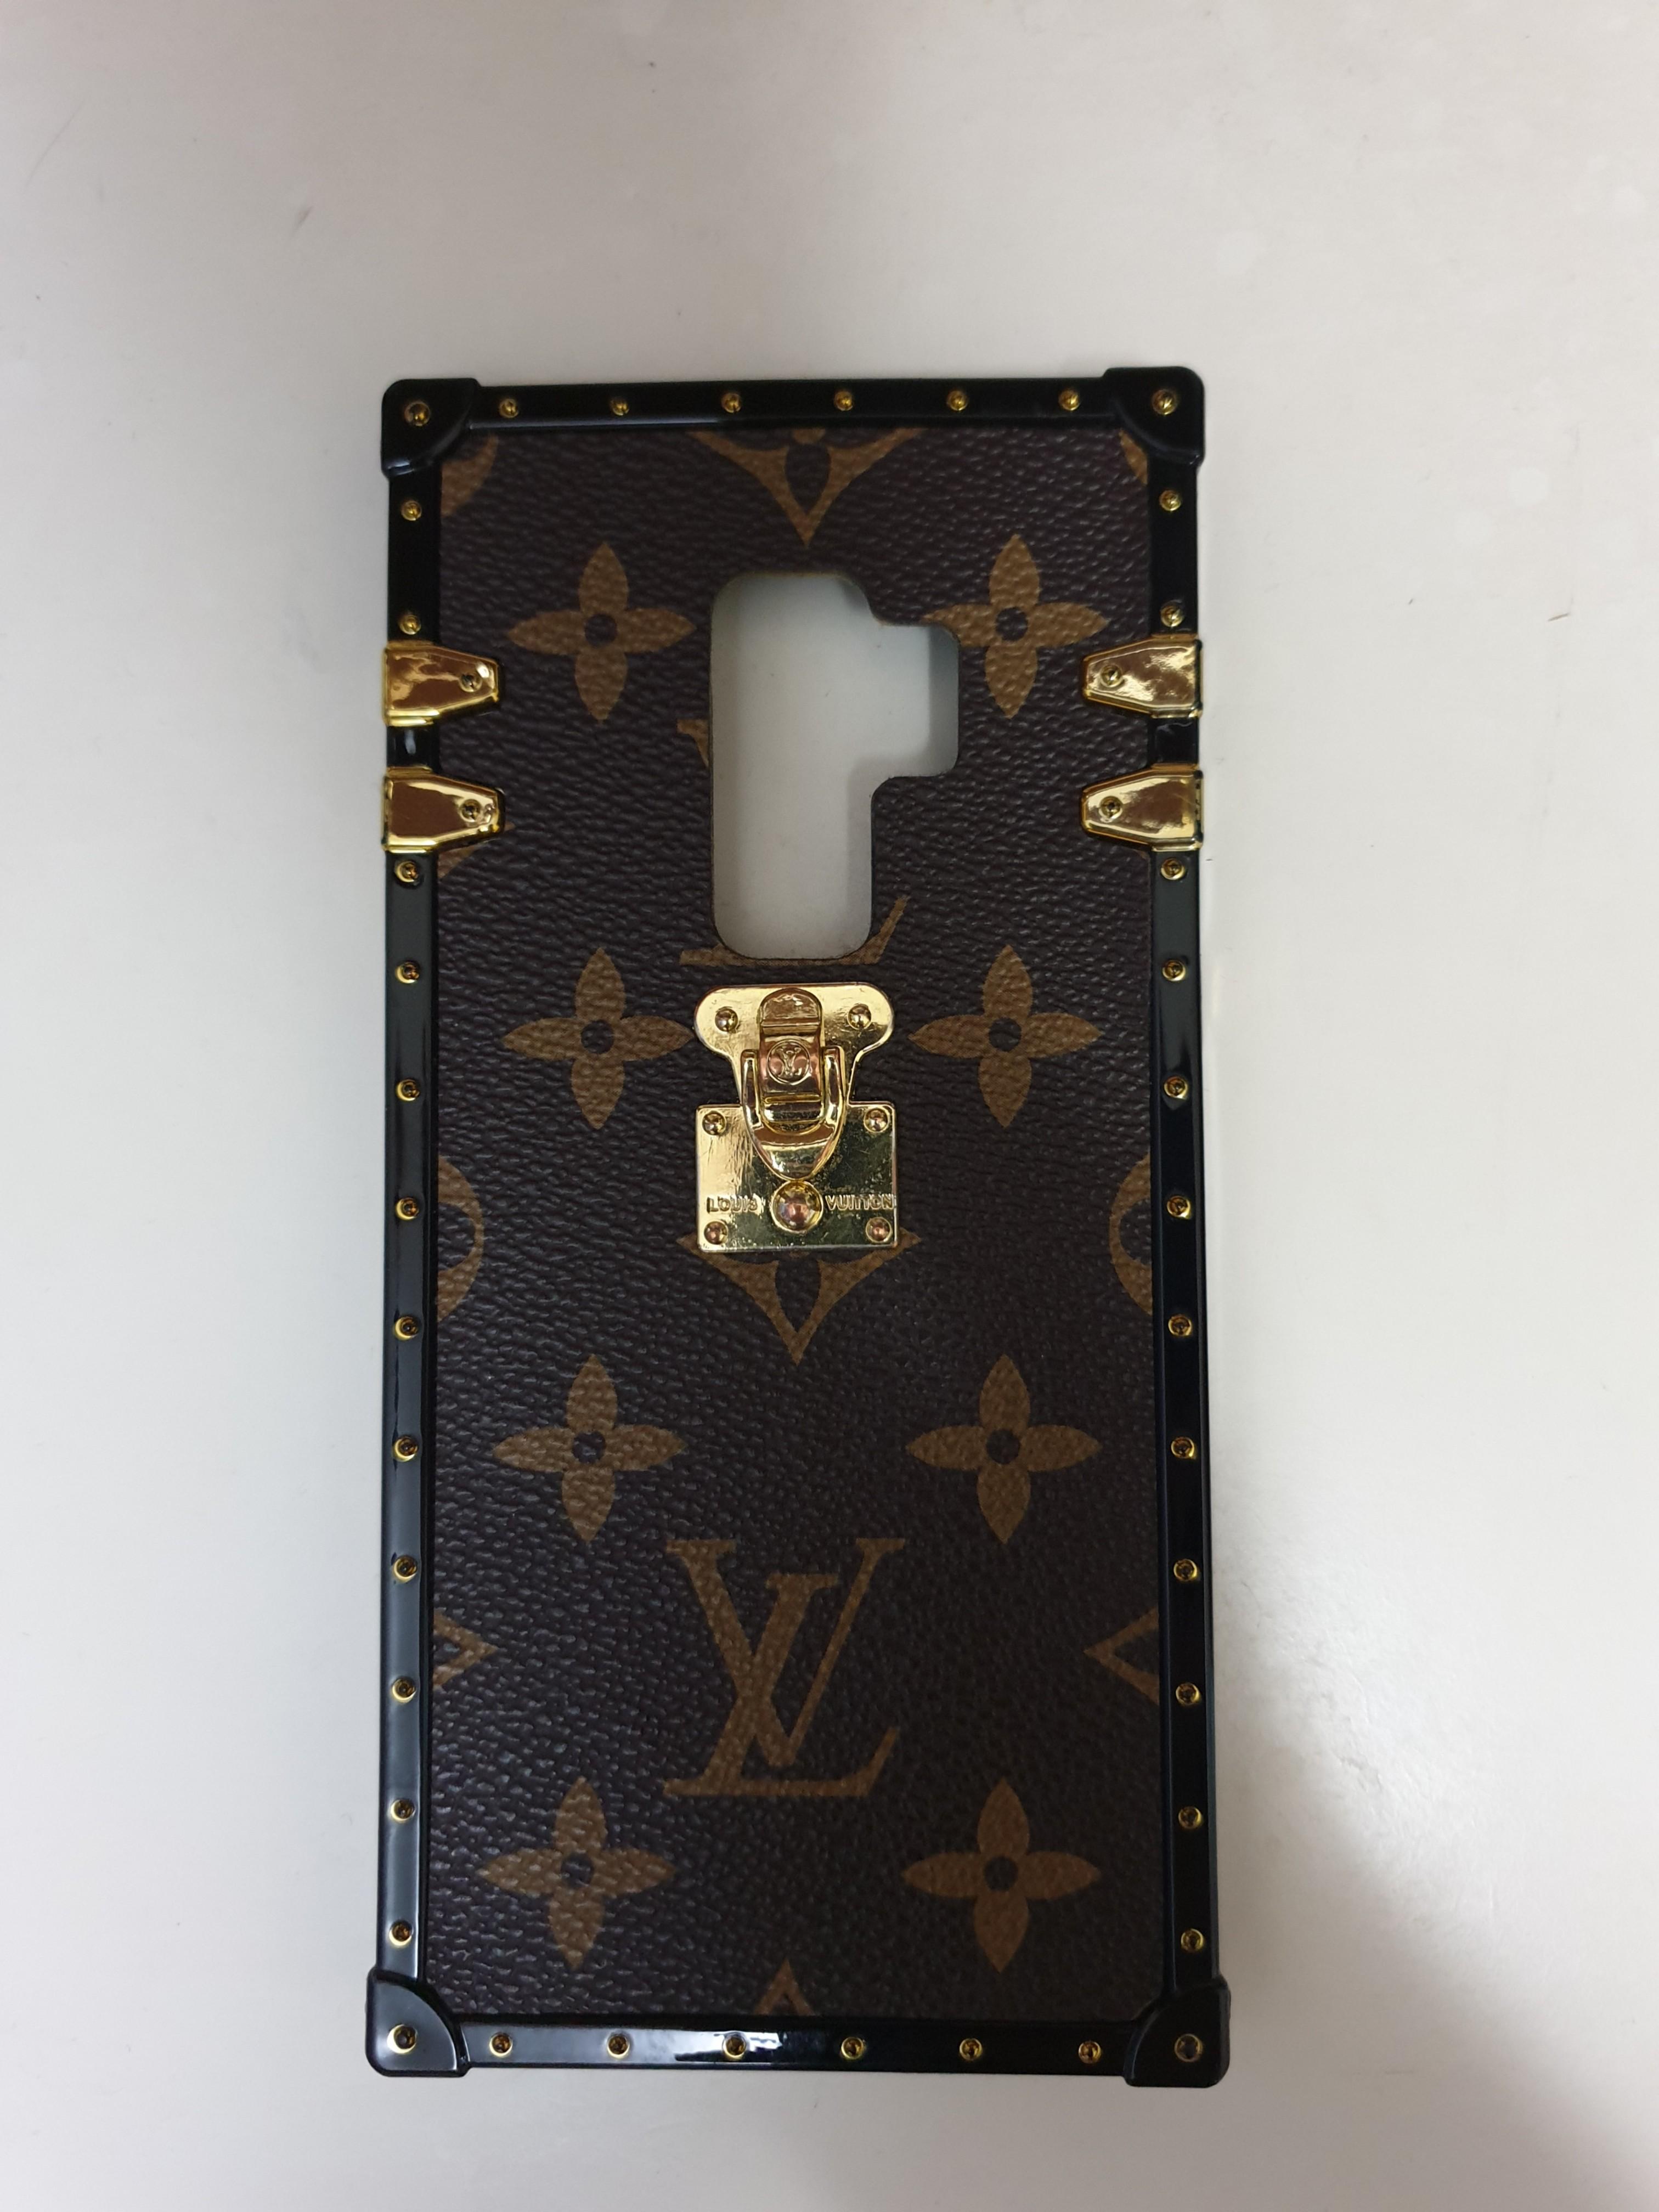 Lv Louis Vuitton Samsung Galaxy S9 Case Cover Mobile Phones Gadgets Mobile Gadget Accessories Cases Sleeves On Carousell